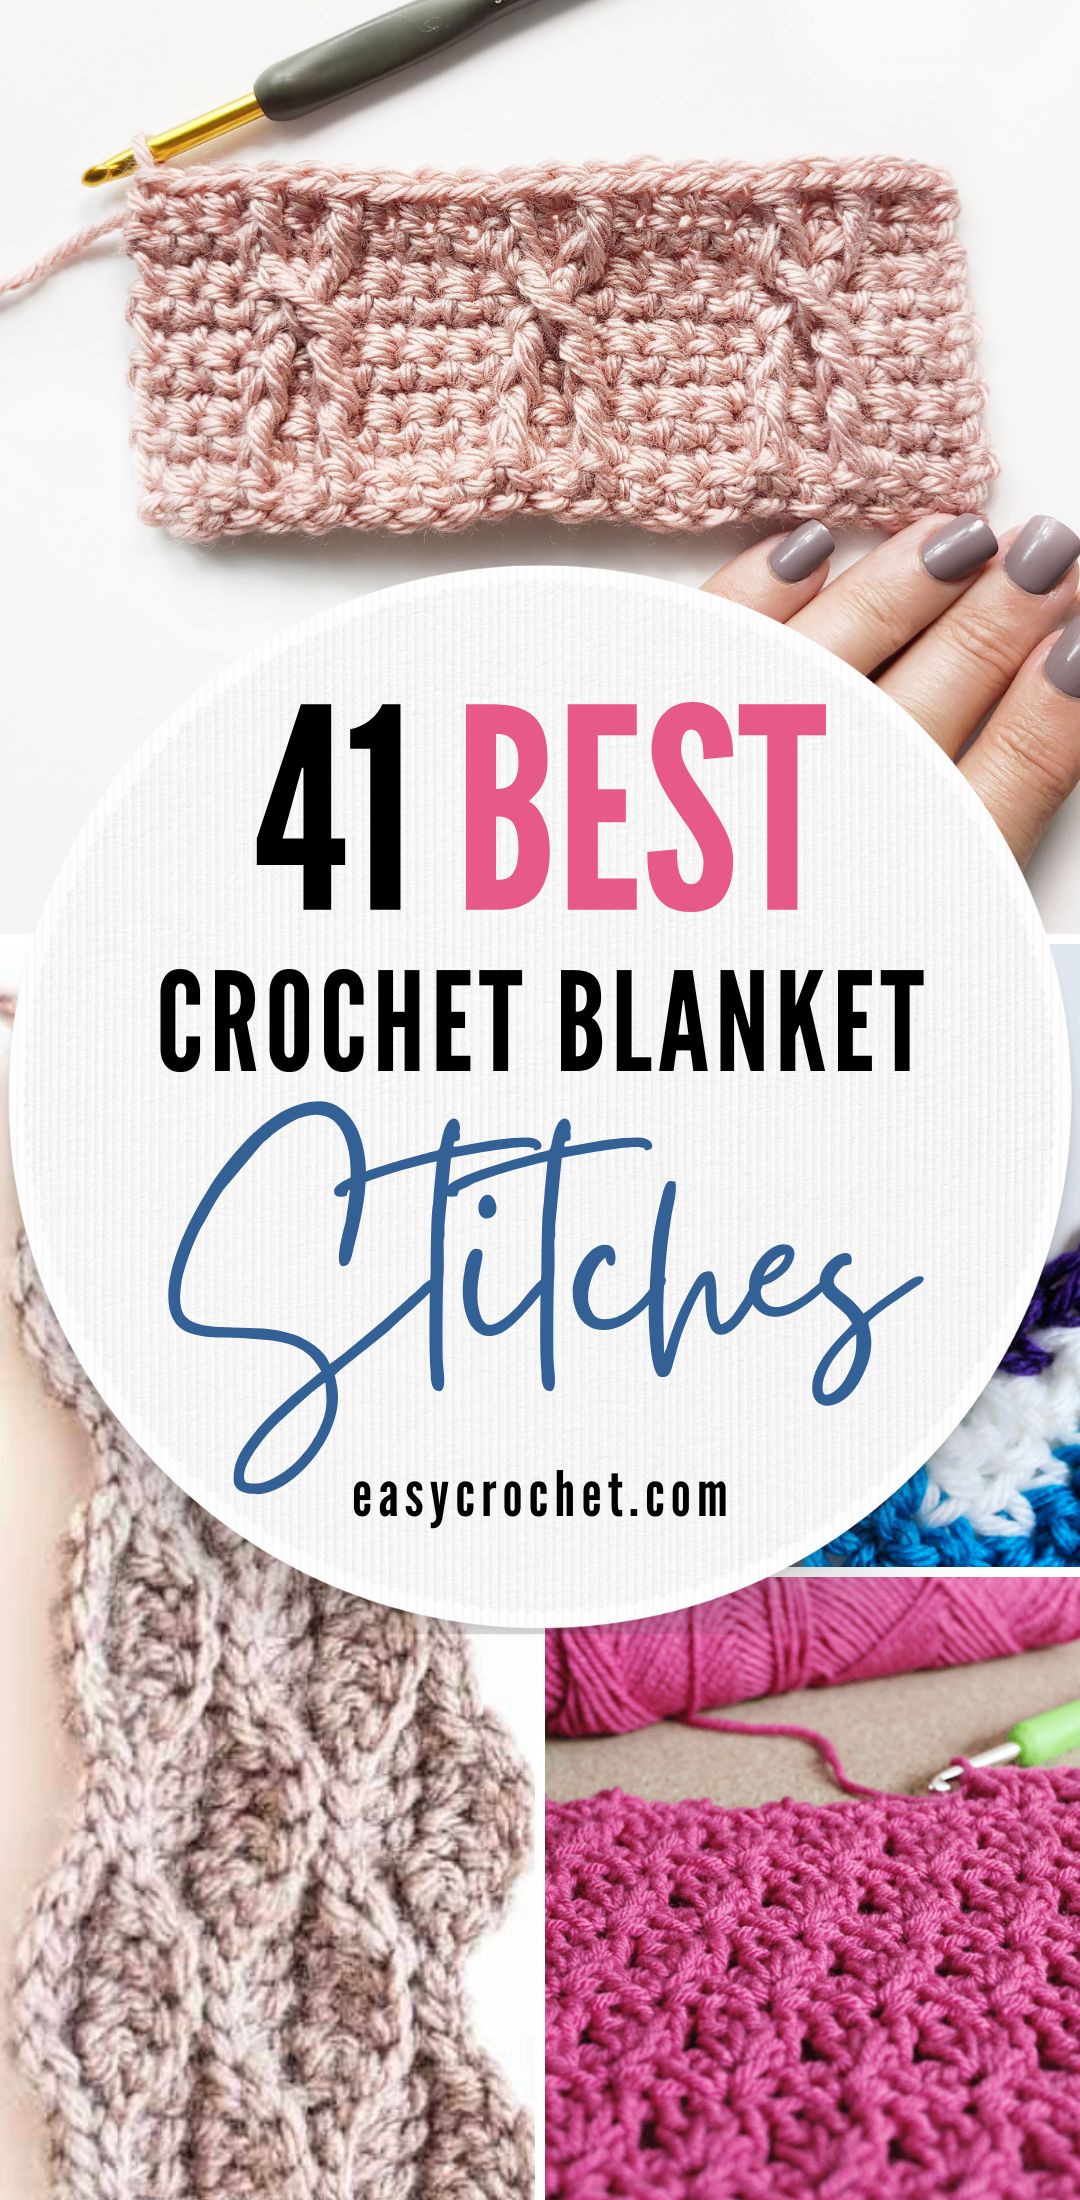 A picture showing some of the best crochet stitches for blankets